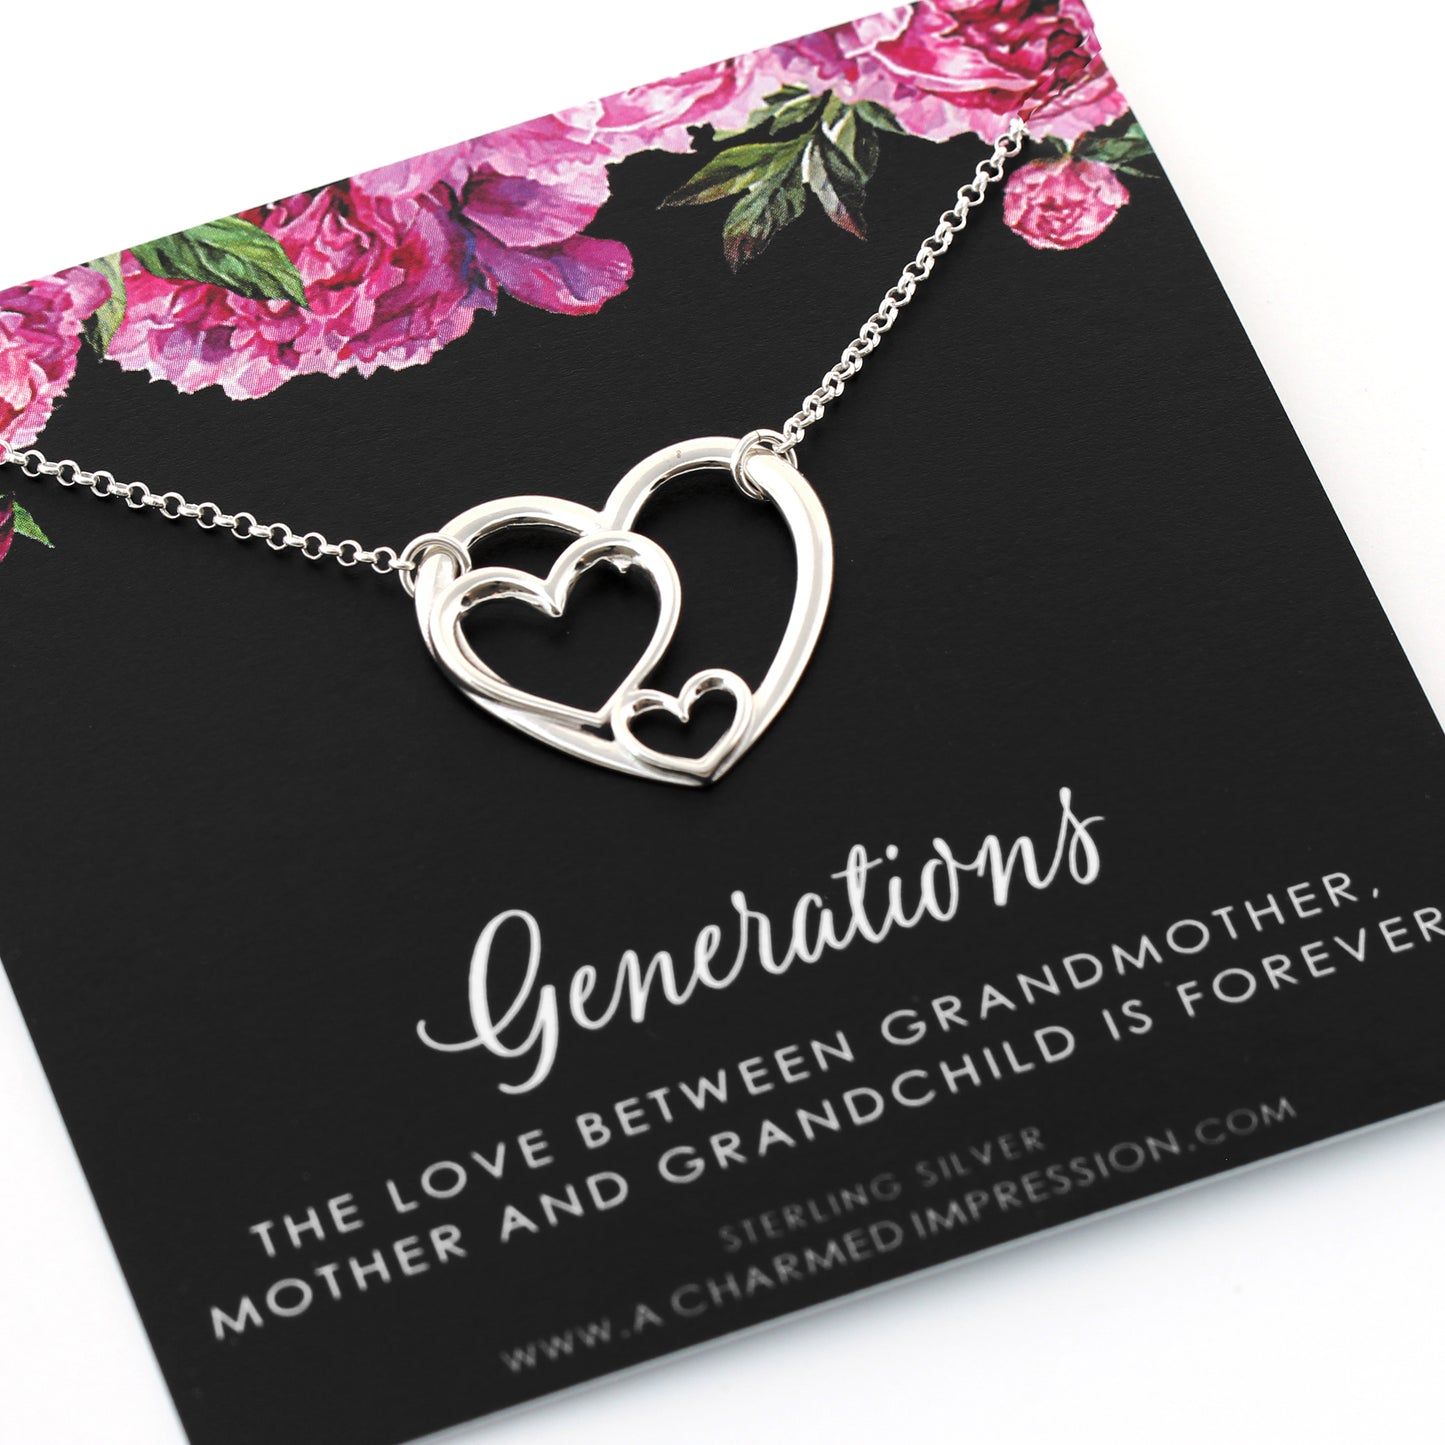 Three Generations Grandmother Mother and Grandchild Necklace Triple Hearts